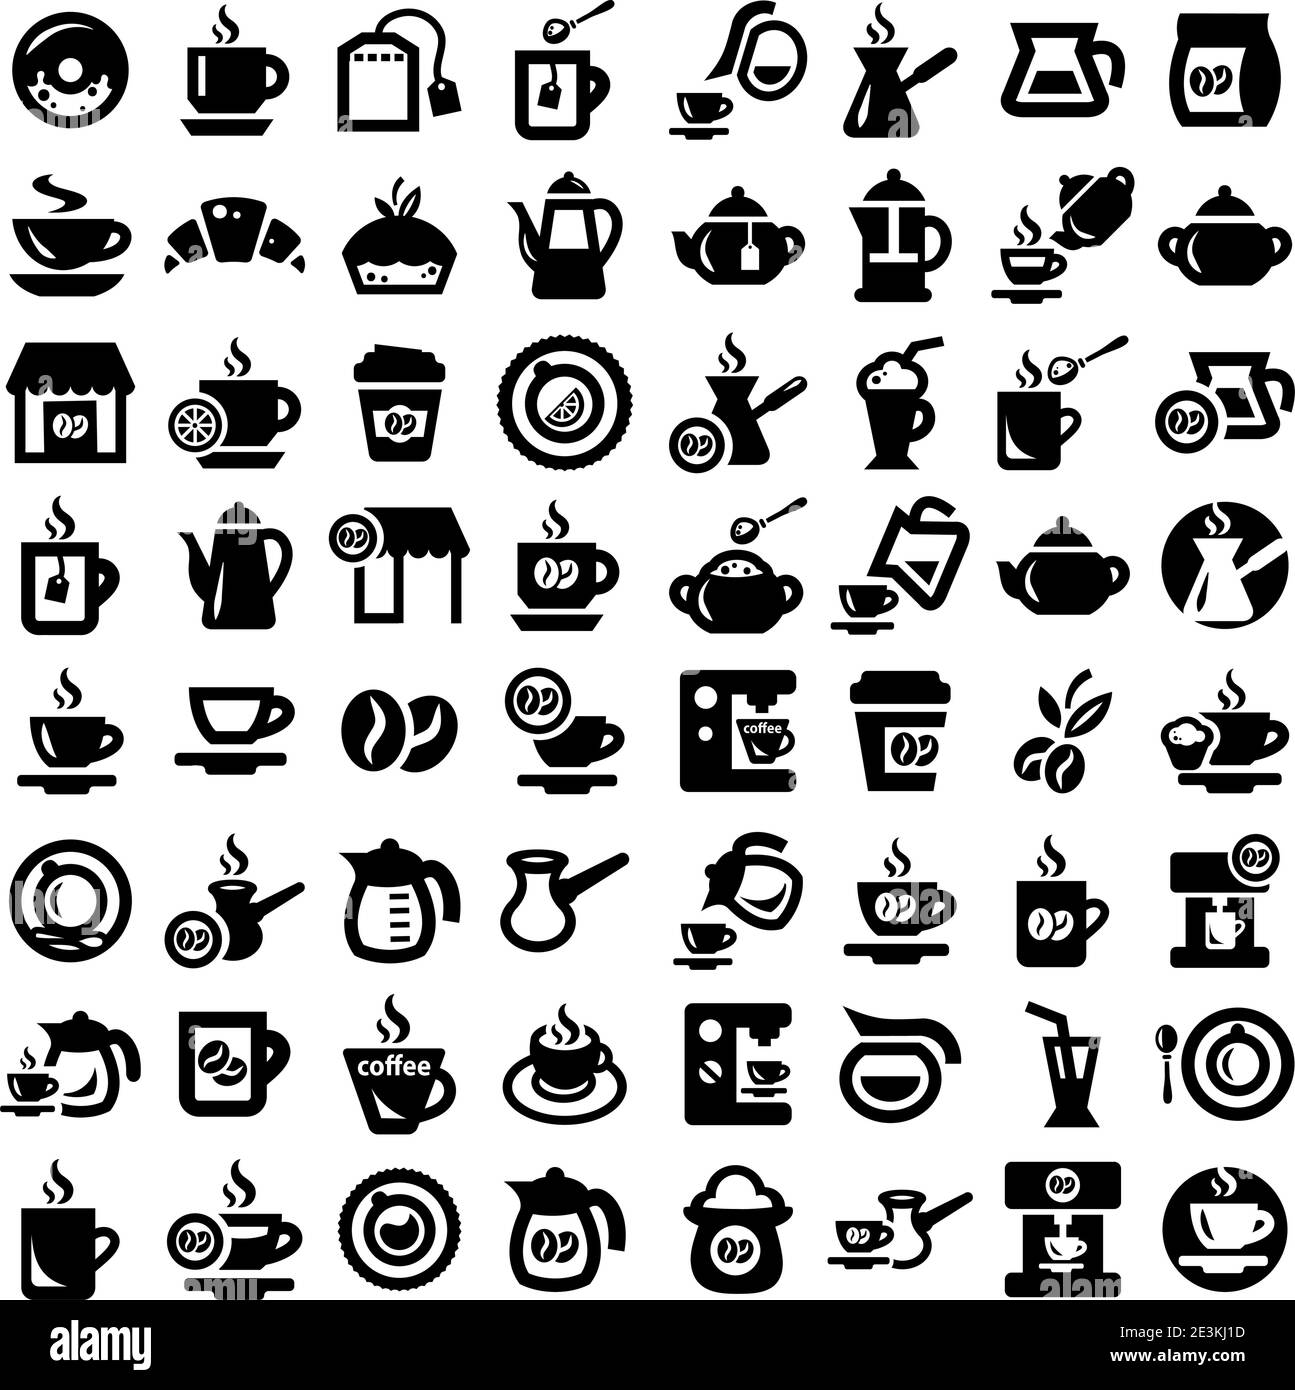 Big Coffee And Tea Icons Set Created For Mobile, Web And Applications. Stock Vector